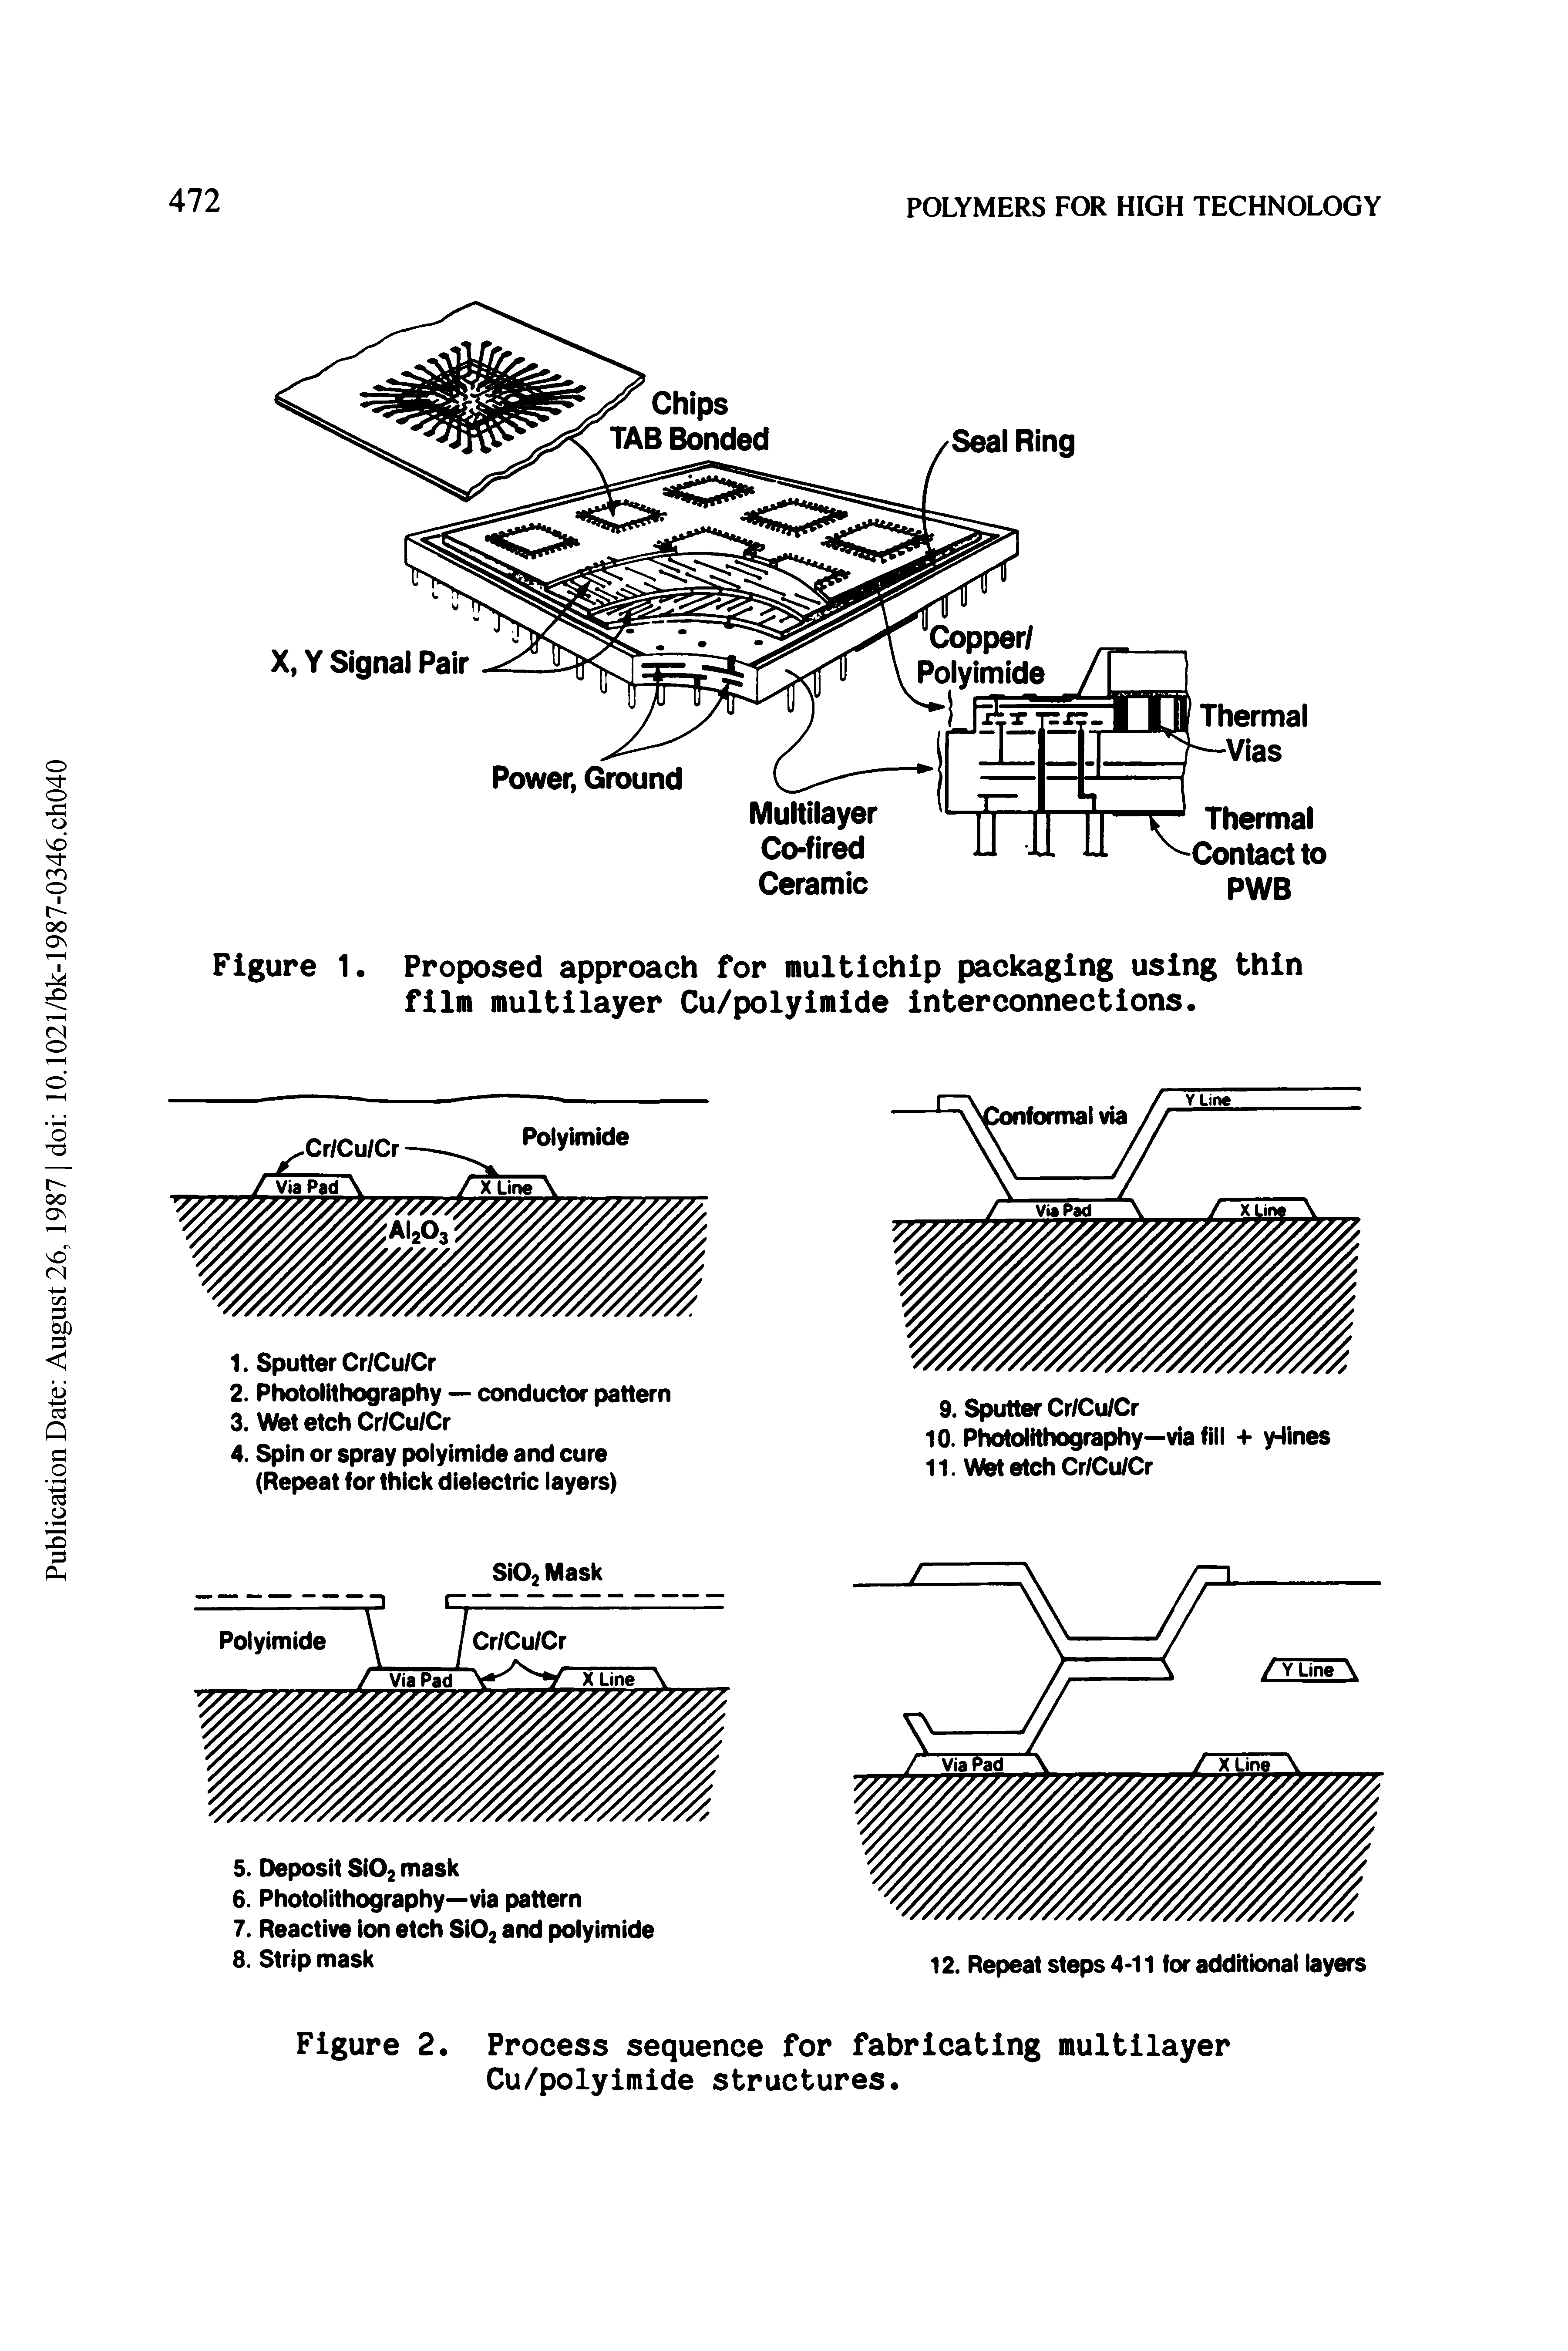 Figure 2. Process sequence for fabricating multilayer Cu/polyimide structures.